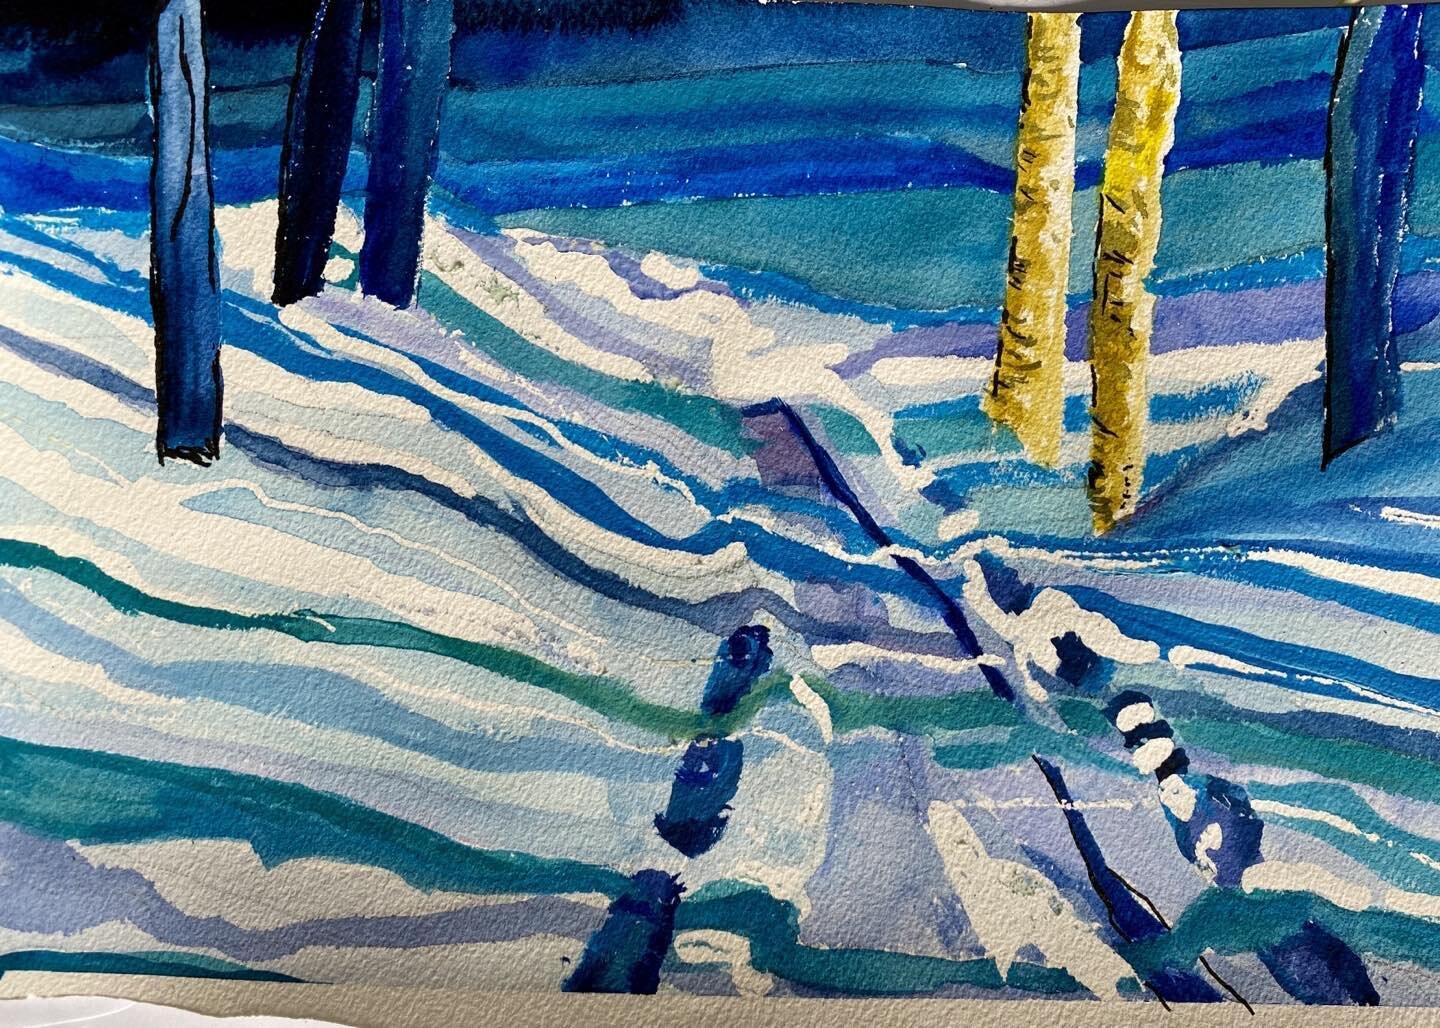 Winter walk in the snow. My watercolour this cold day. #watercolours #ontario #nature #paint #painting #art #hobby #watercolour #trees #artistsoninstagram #paints #artoftheday  #artcurator #drawingoftheday